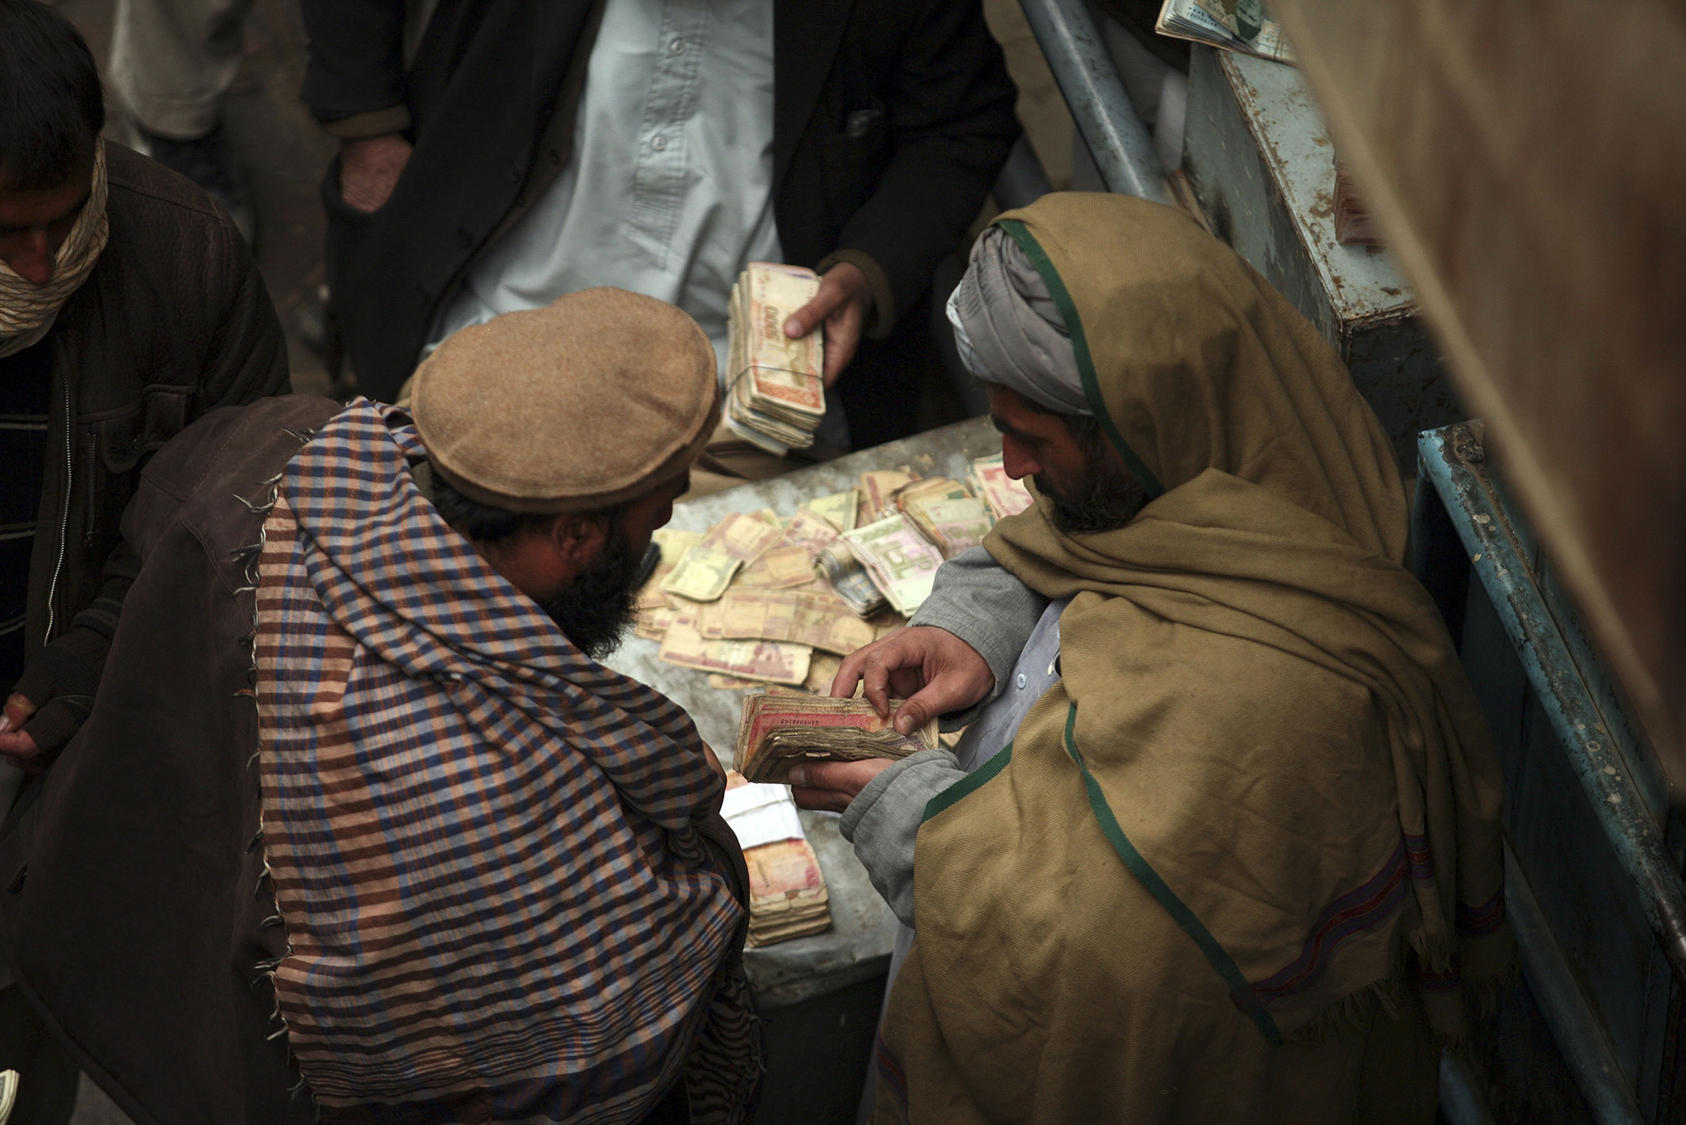 Men negotiate money exchanges at a market in Kabul. (Michael Kamber/The New York Times)